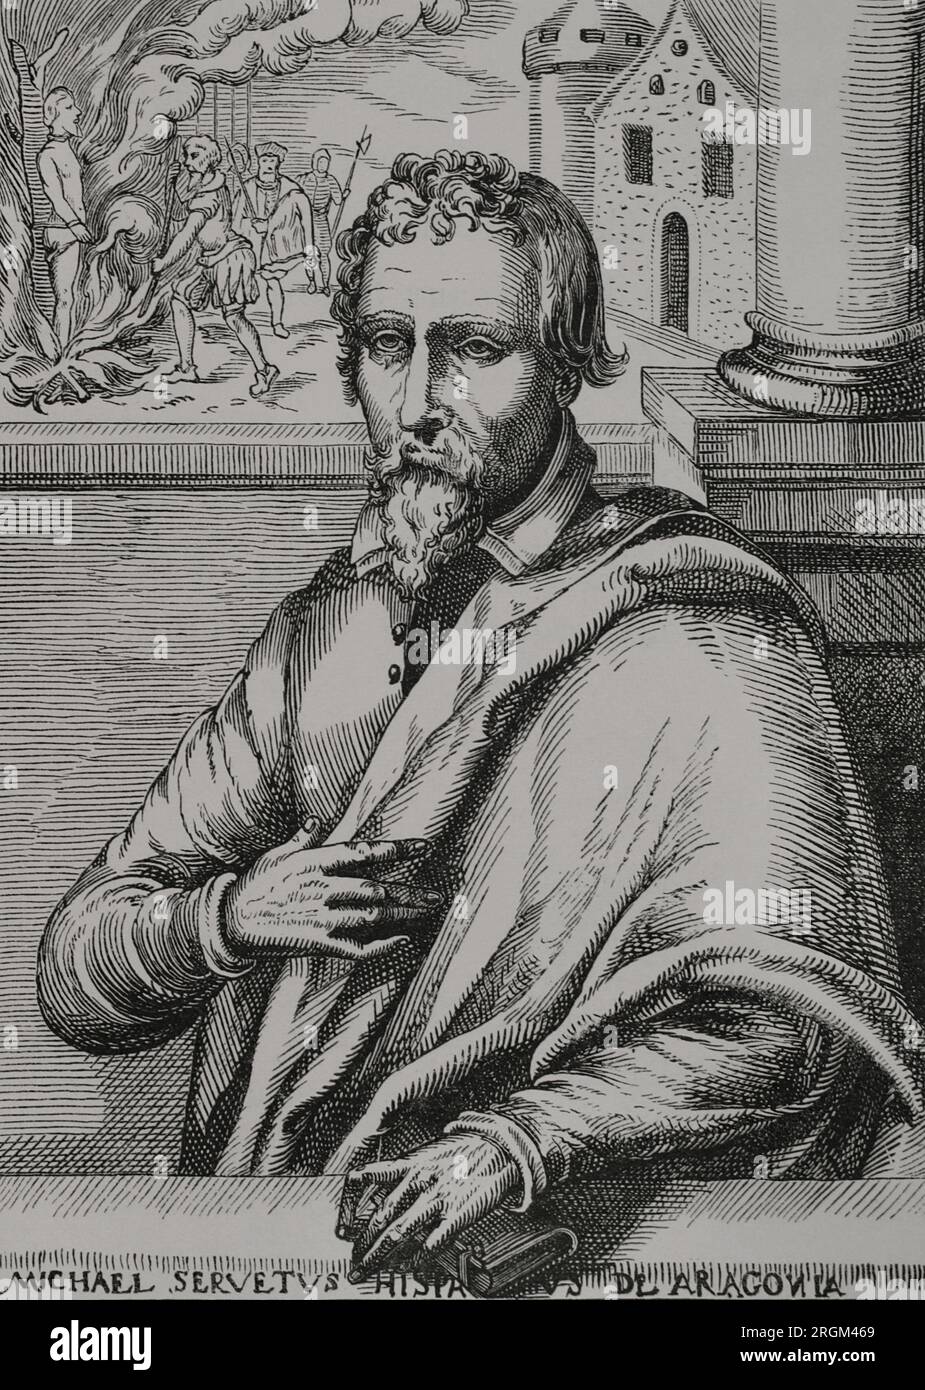 Michael Servetus (1511-1553). Spanish physician and theologian. Persecuted by the Inquisition, he fled to Geneva, where on Calvin's initiative was condemned to be burned at the stake for heresy. Portrait. 19th century facsimile of an engraving in 'Historia Michaelis Serveti', 1727. 'Vie Militaire et Religieuse au Moyen Age et à l'Epoque de la Renaissance'. Paris, 1877. Stock Photo